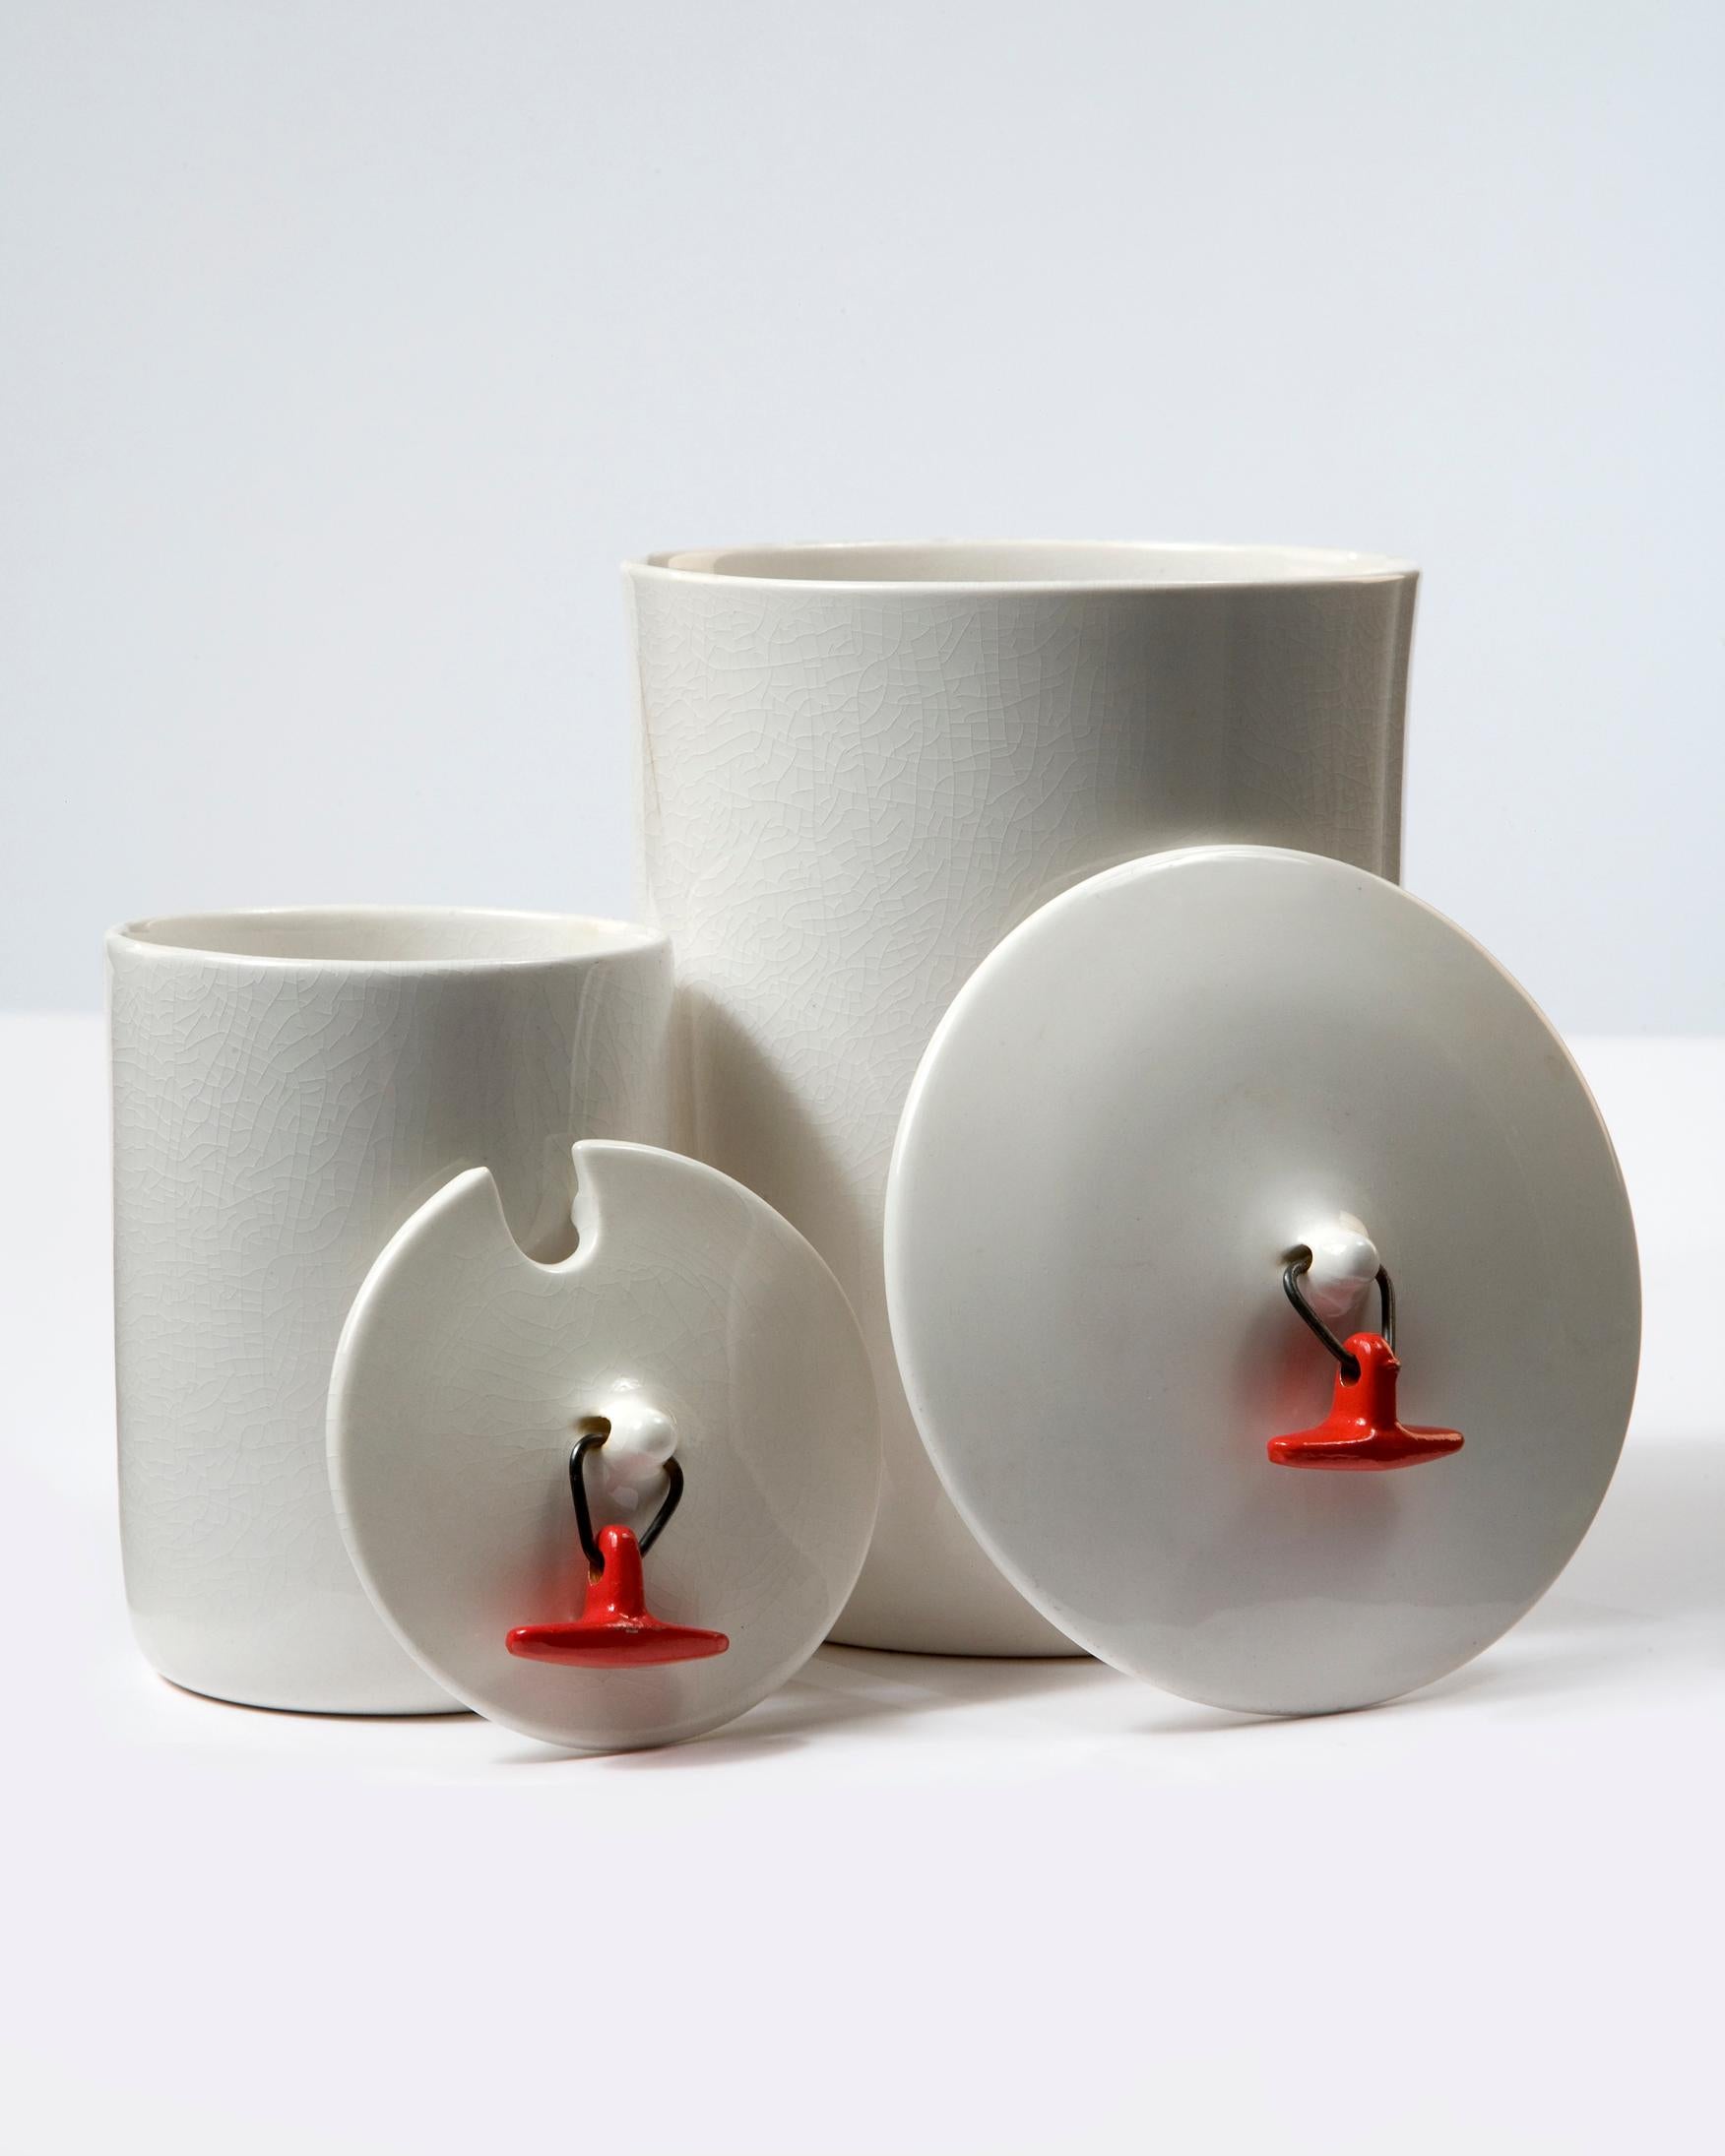 Set of two white ceramic canisters with red toggle-handled lids. Designed by La Gardo Tackett for Schmid International, Japan, 1950s.